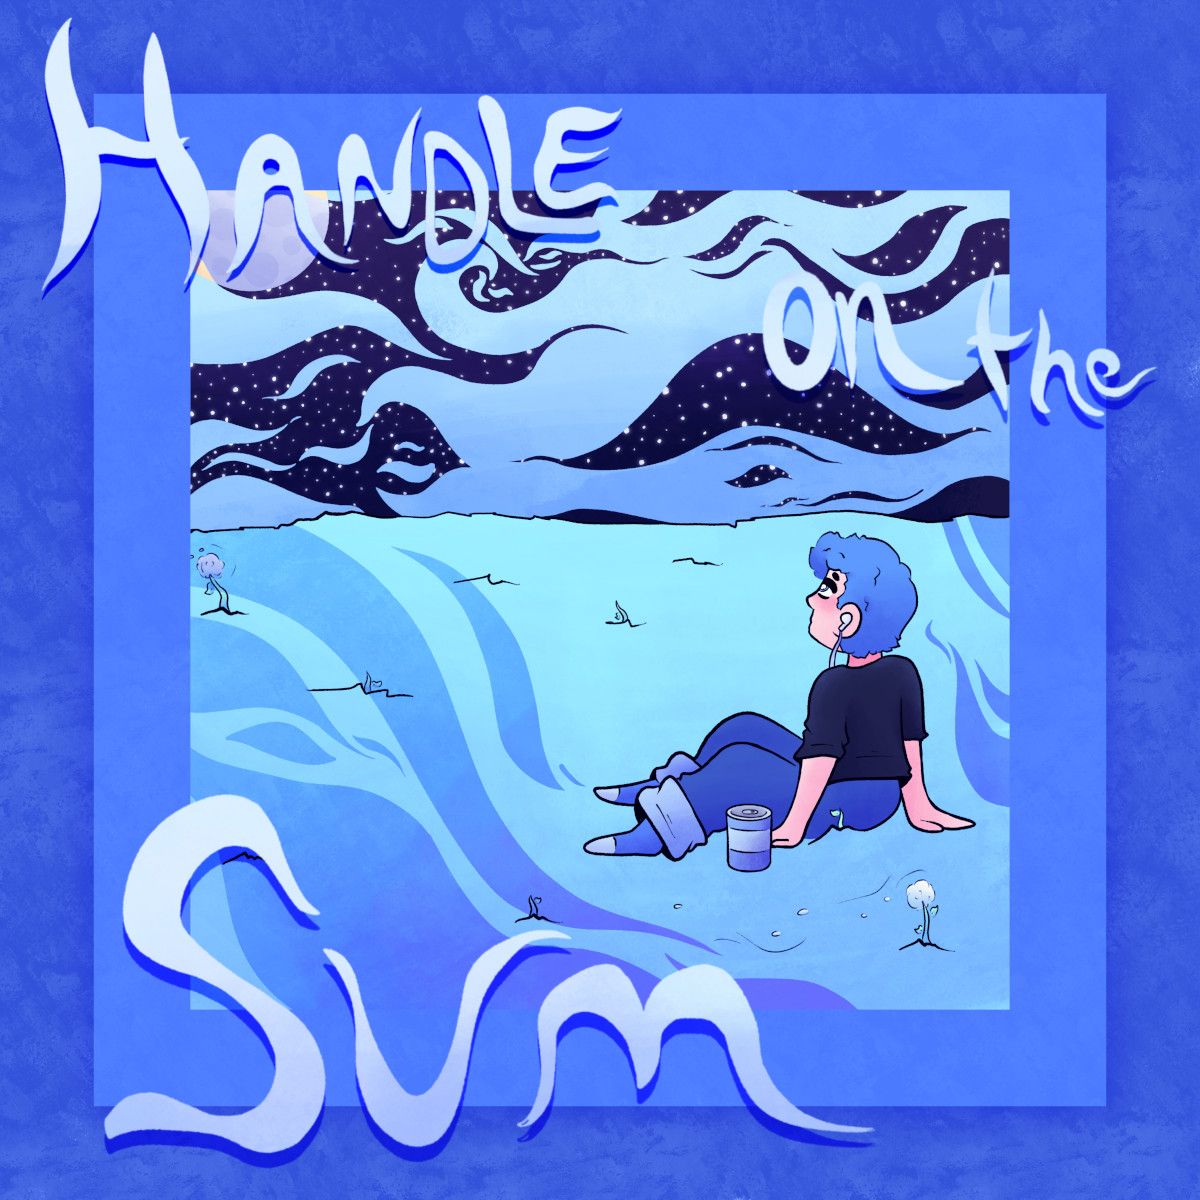 Art for Handle on the Sum by The Static Dive